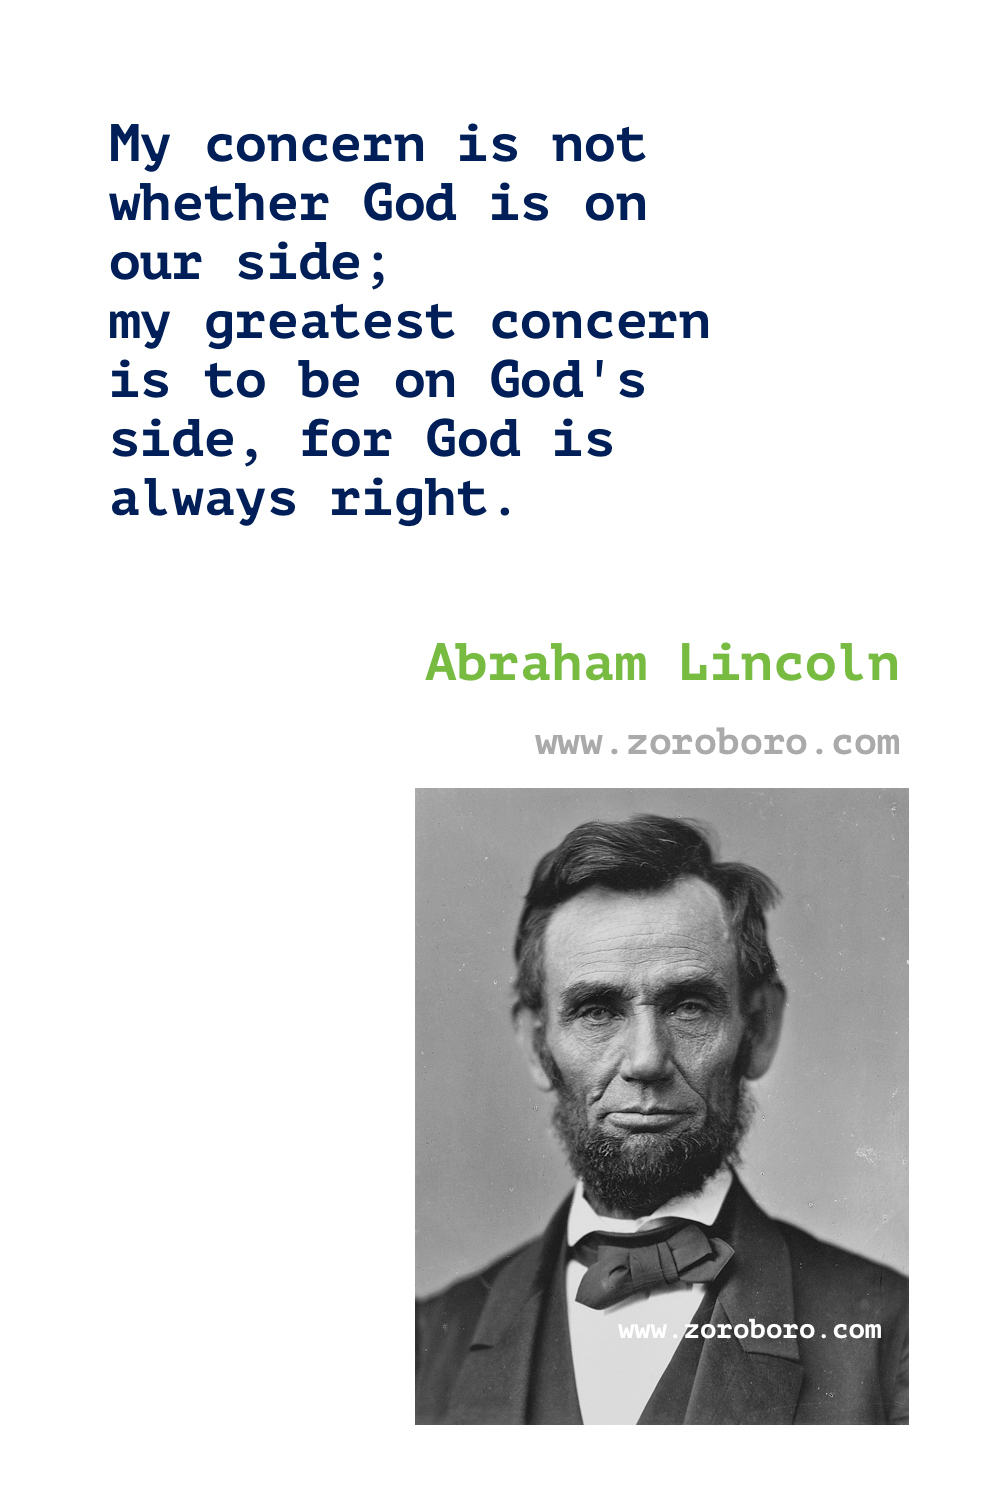 Abraham Lincoln Quotes. Abraham Lincoln Freedom Quotes, Life Quotes, Hope Quotes, & Democracy Quotes. Abraham Lincoln Inspirational Quotes. Abraham Lincoln Books Quotes